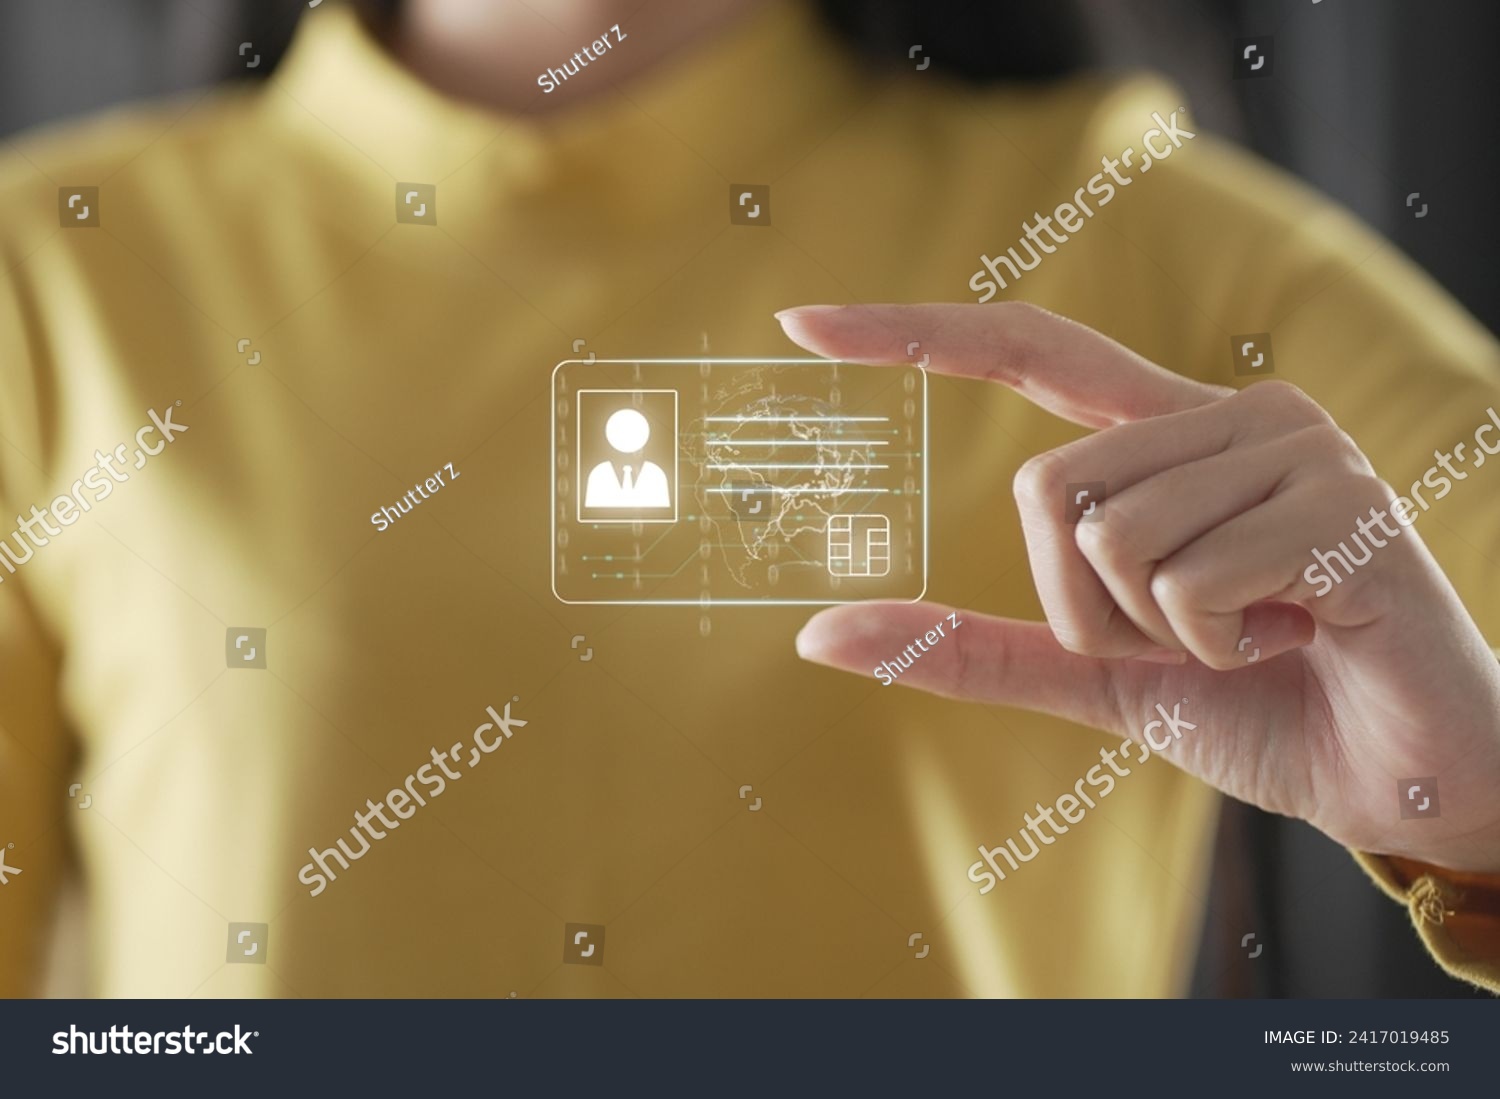 human hand holding digital identification card, technology and innovation concept. hand and digital identification card or digital ID.	 #2417019485